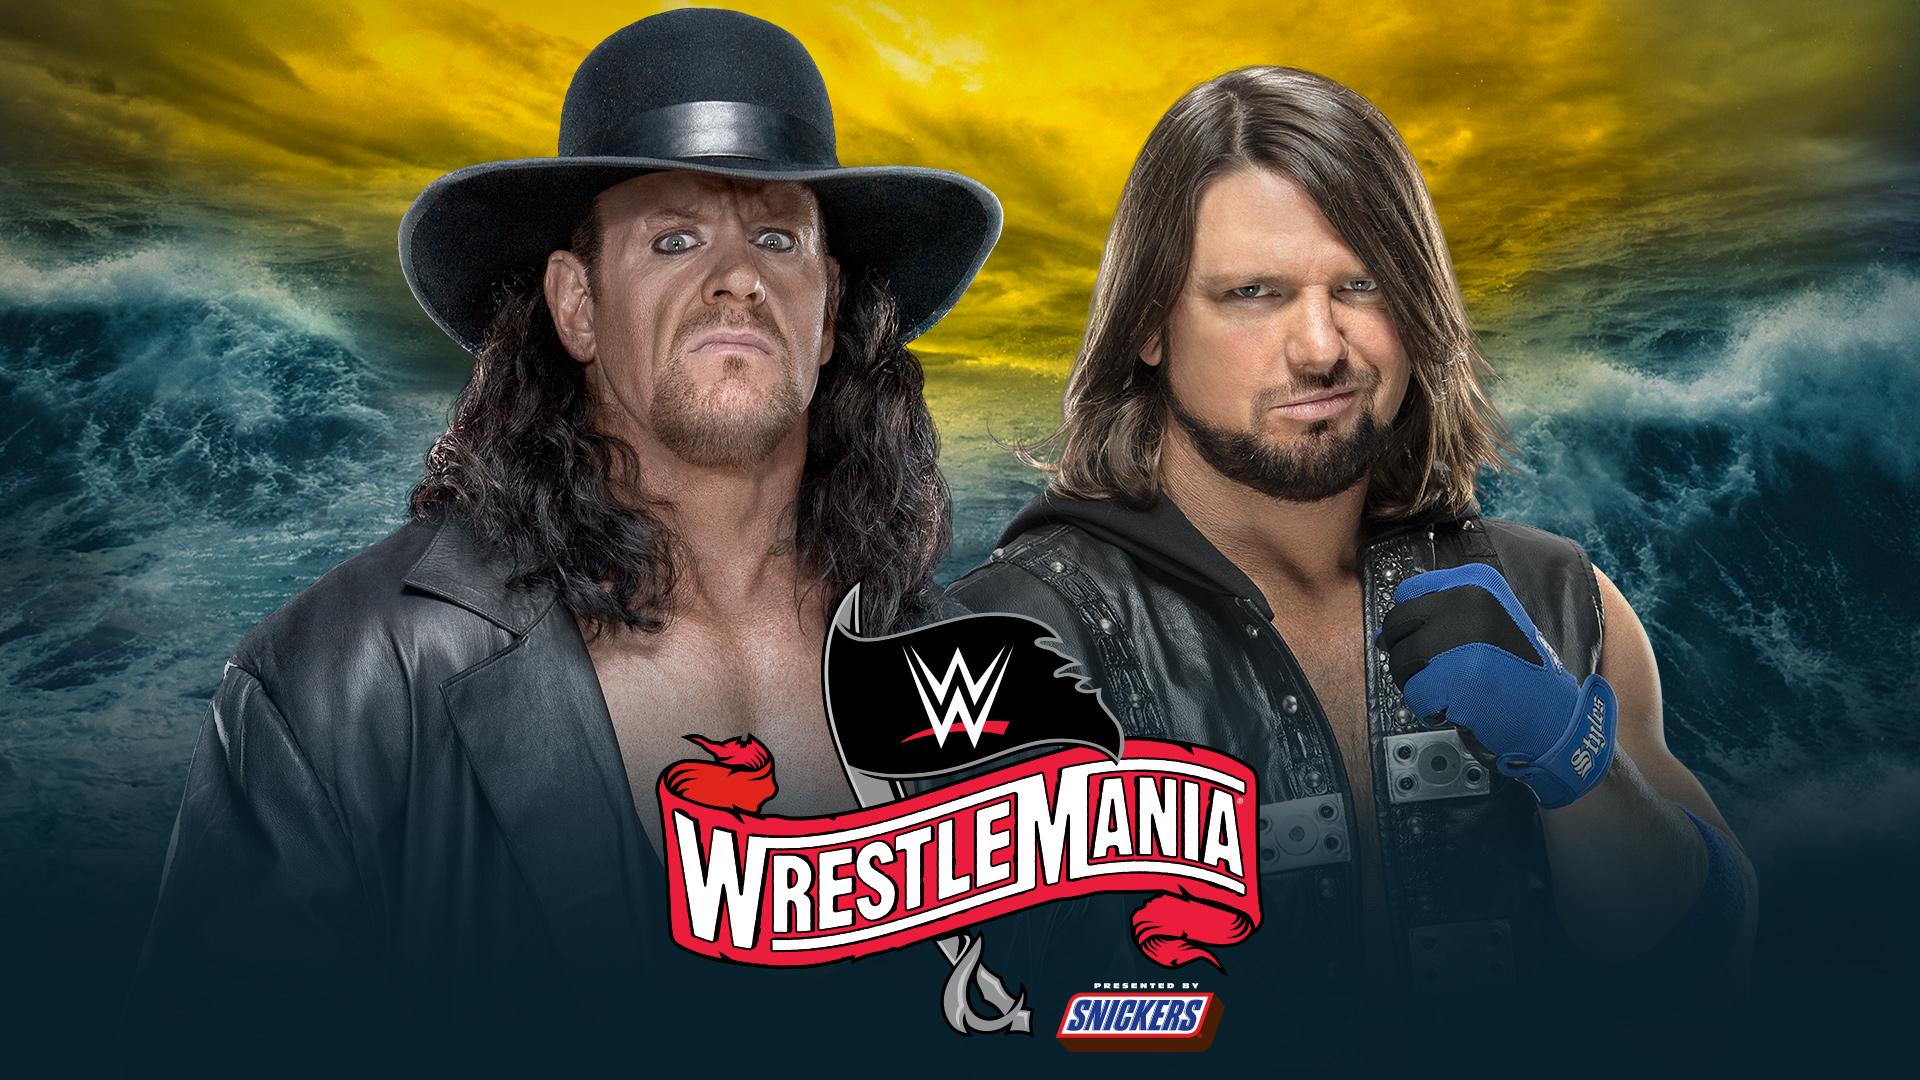 A LOOK INTO THE UNDERTAKER AT WRESTLEMANIA 36